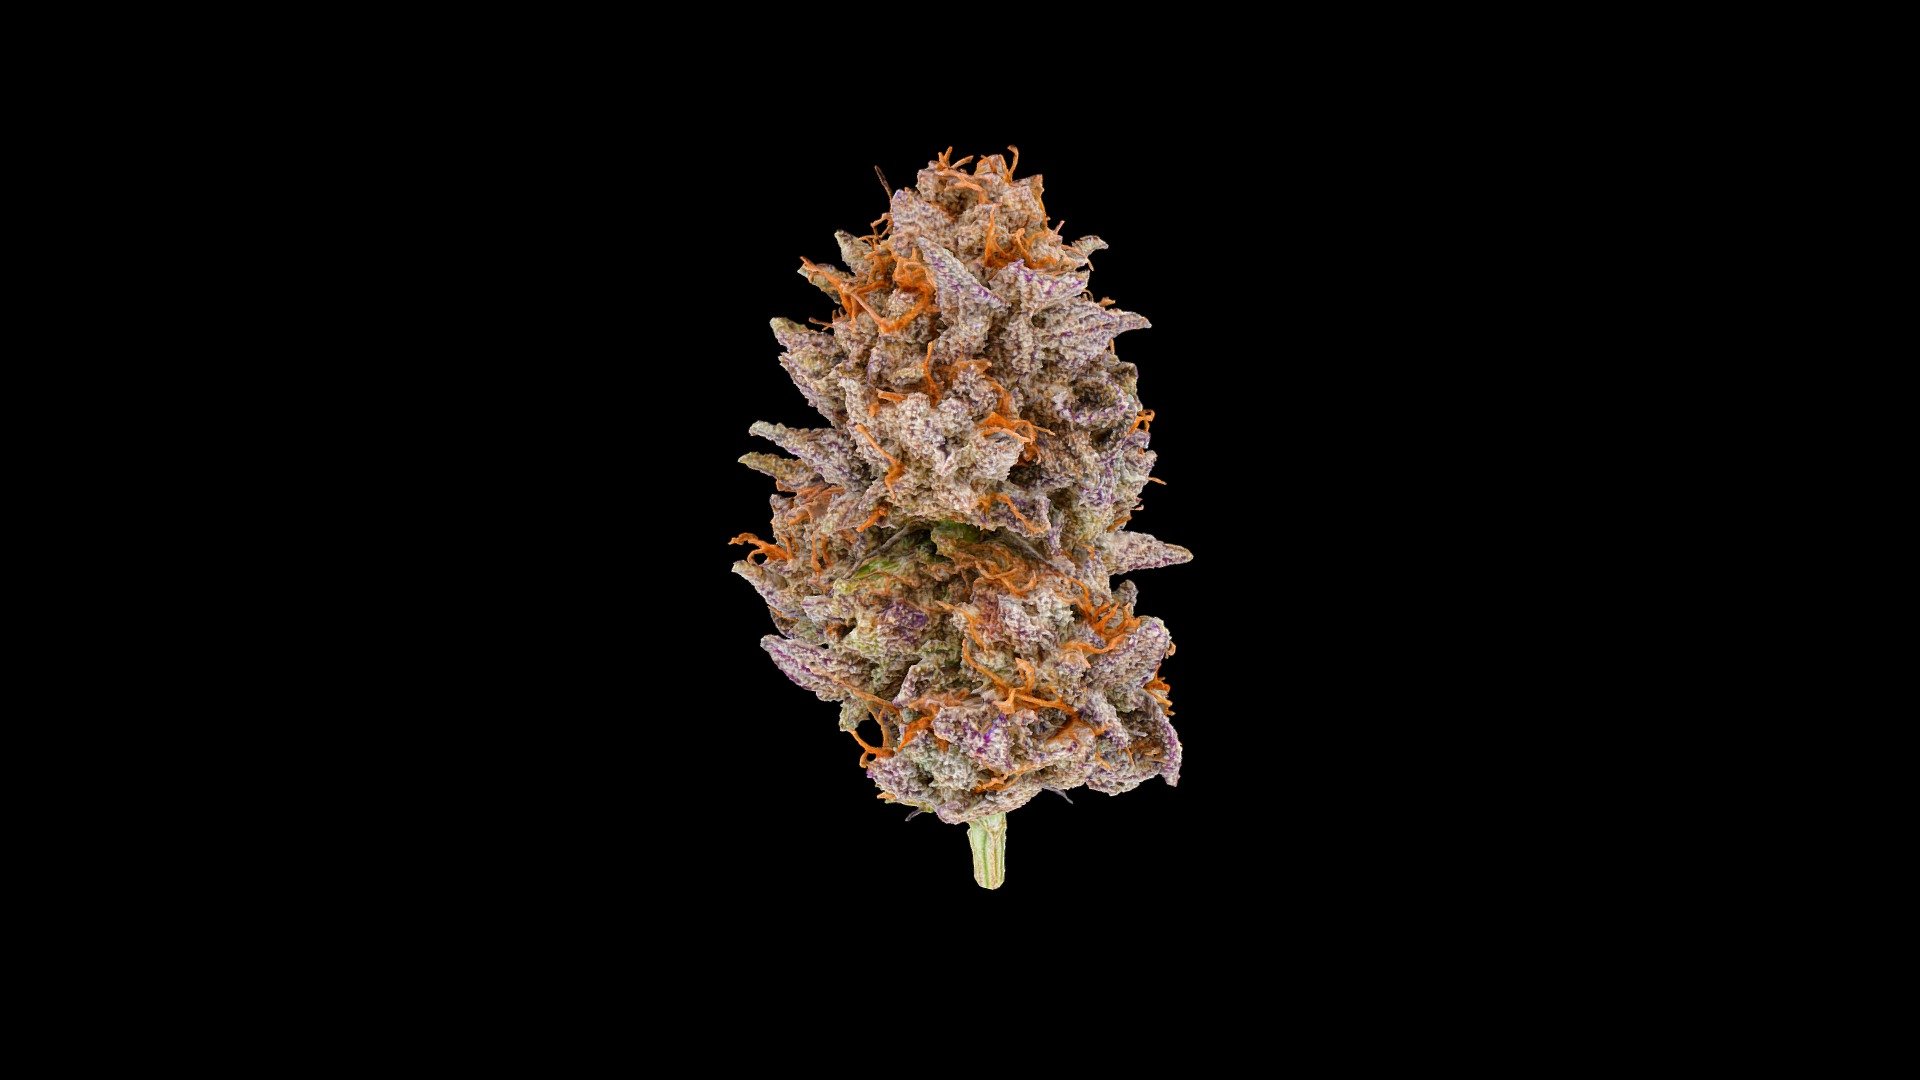 Cannabis bud, Peanut Butter Breath strain, created using photogrammetry. To be used as part of an NFT collection, and for demonstrating 3D cannabis menu capabilities.

Equipment used: Sony A7R IV, 3DS Max.

Not for sale 3d model